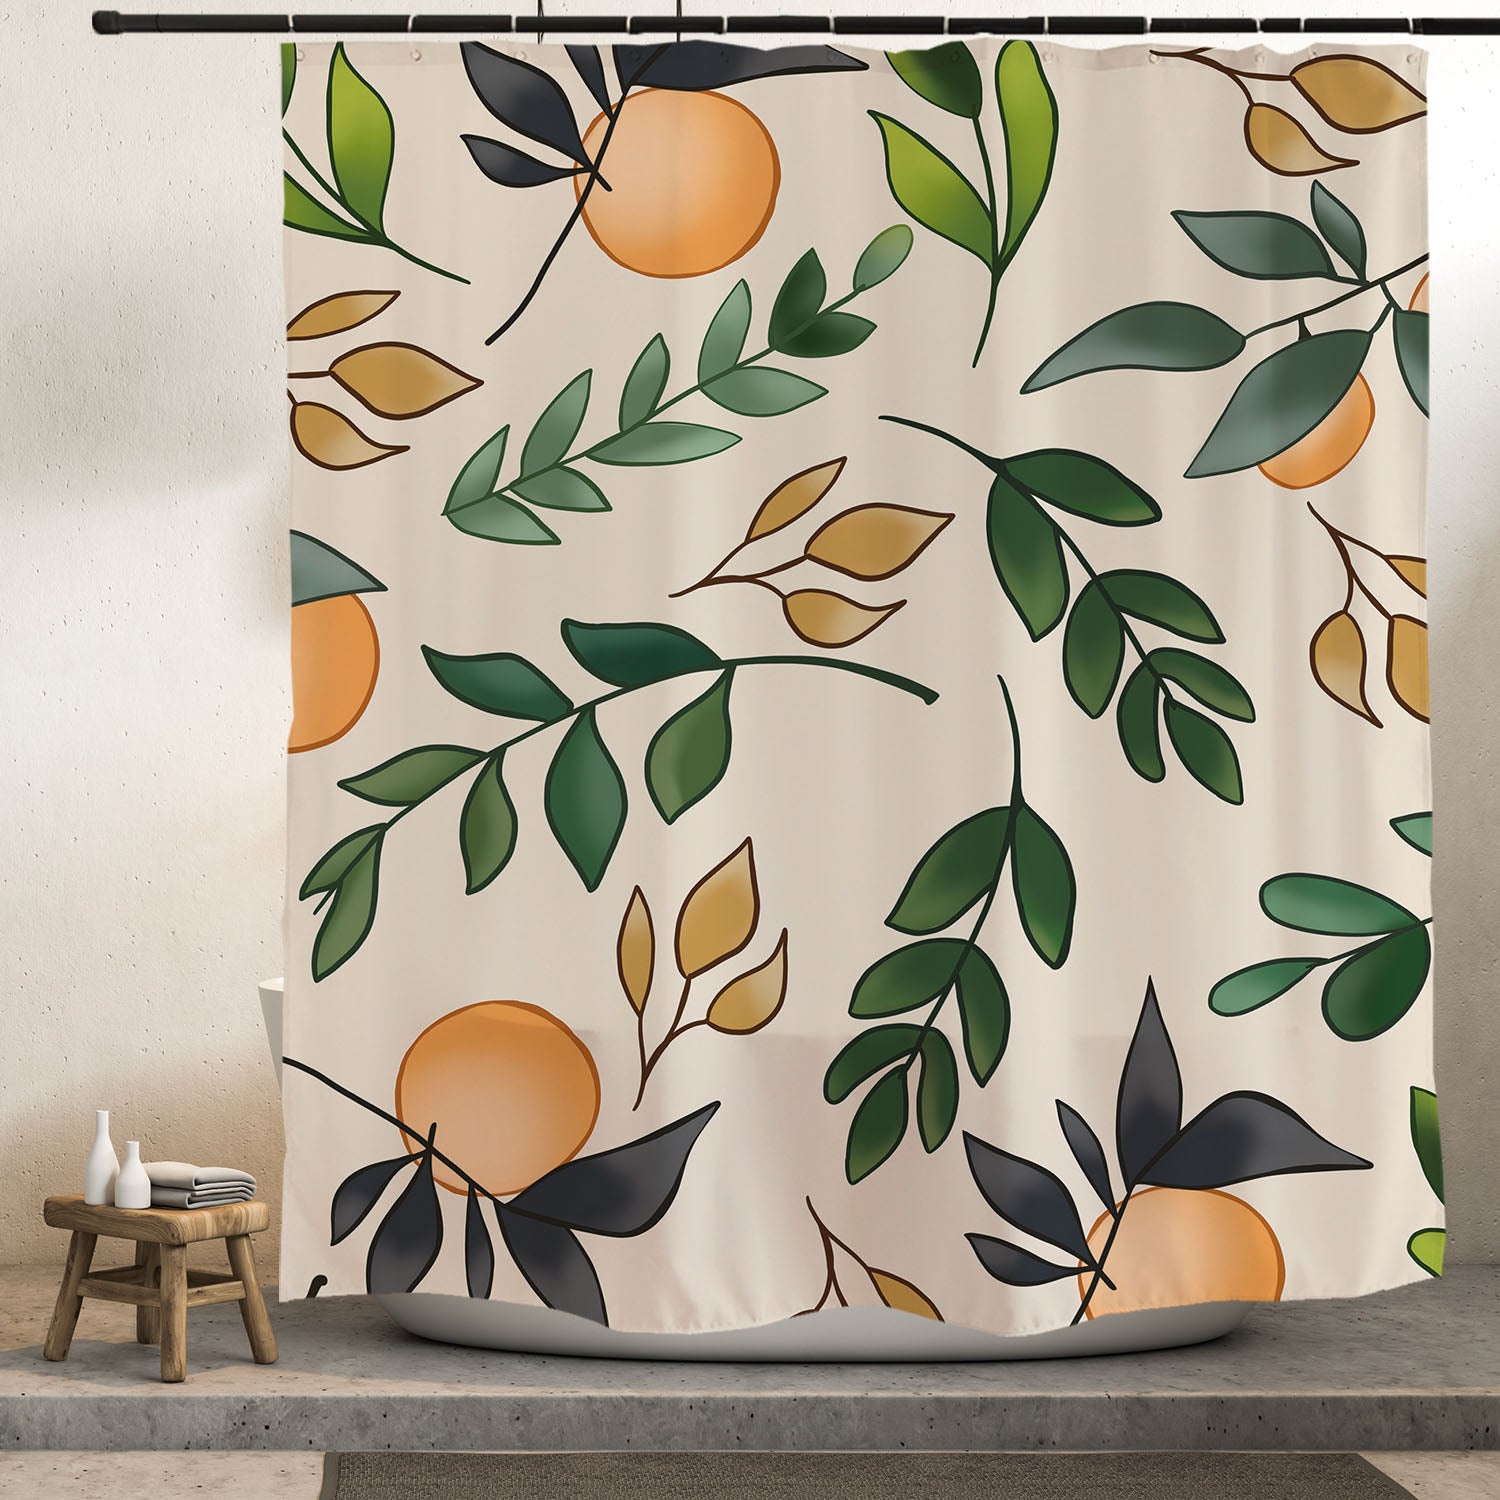 Feblilac Oranges and Leaves Shower Curtain with Hooks